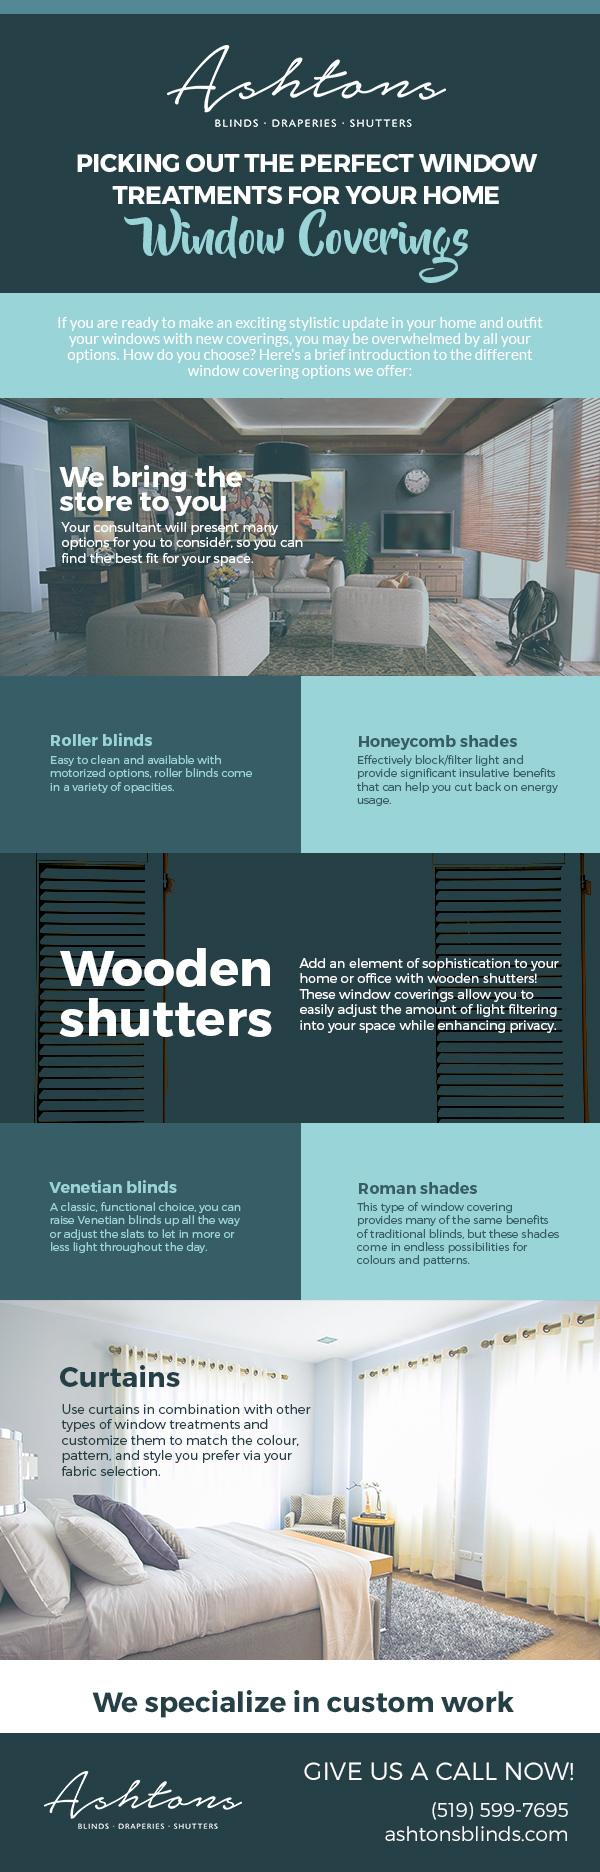 Picking Out the Perfect Window Treatments for Your Home [infographic]